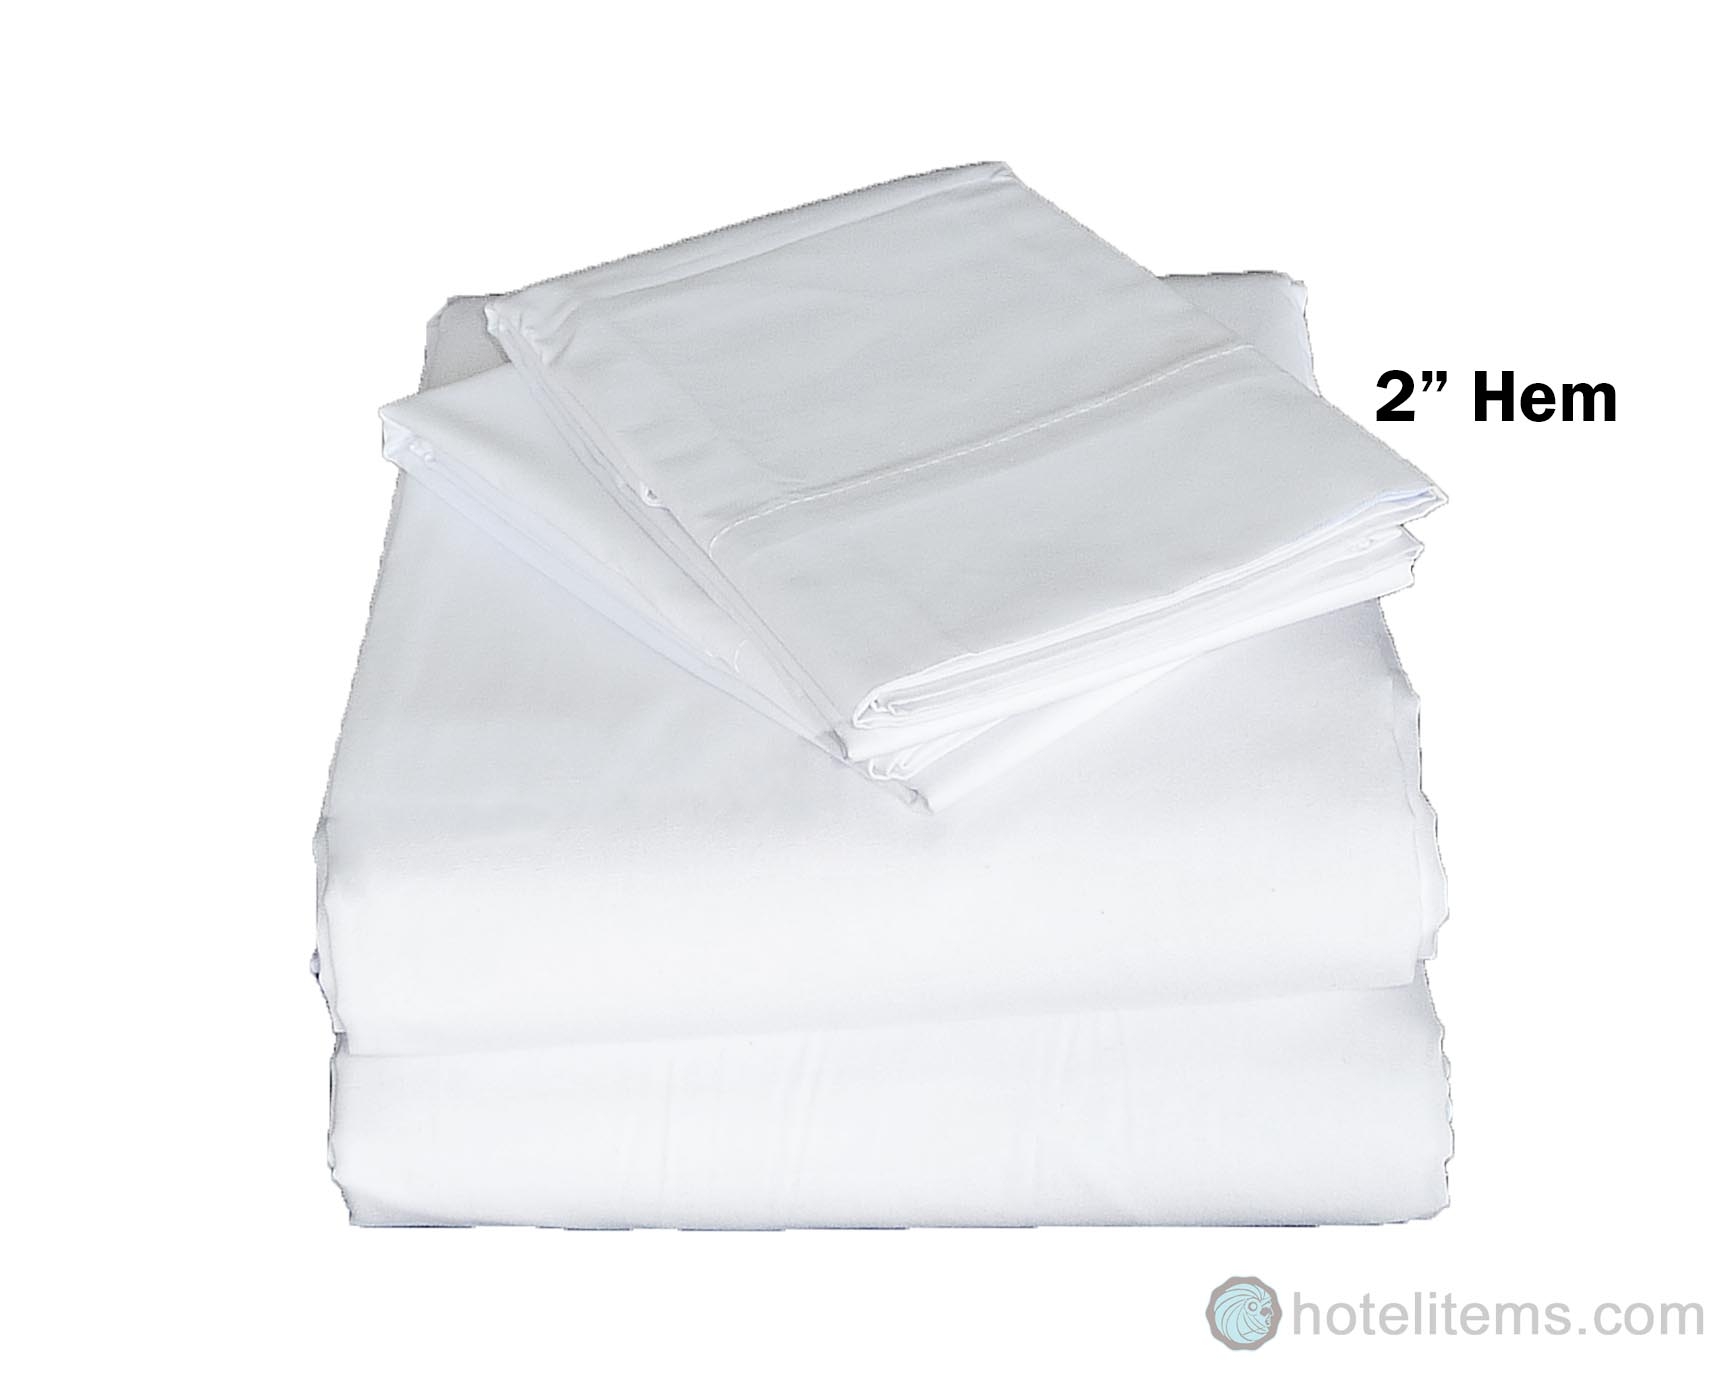 2 new standard twin size white hotel fitted sheet t180 percale crf 39x75x9 